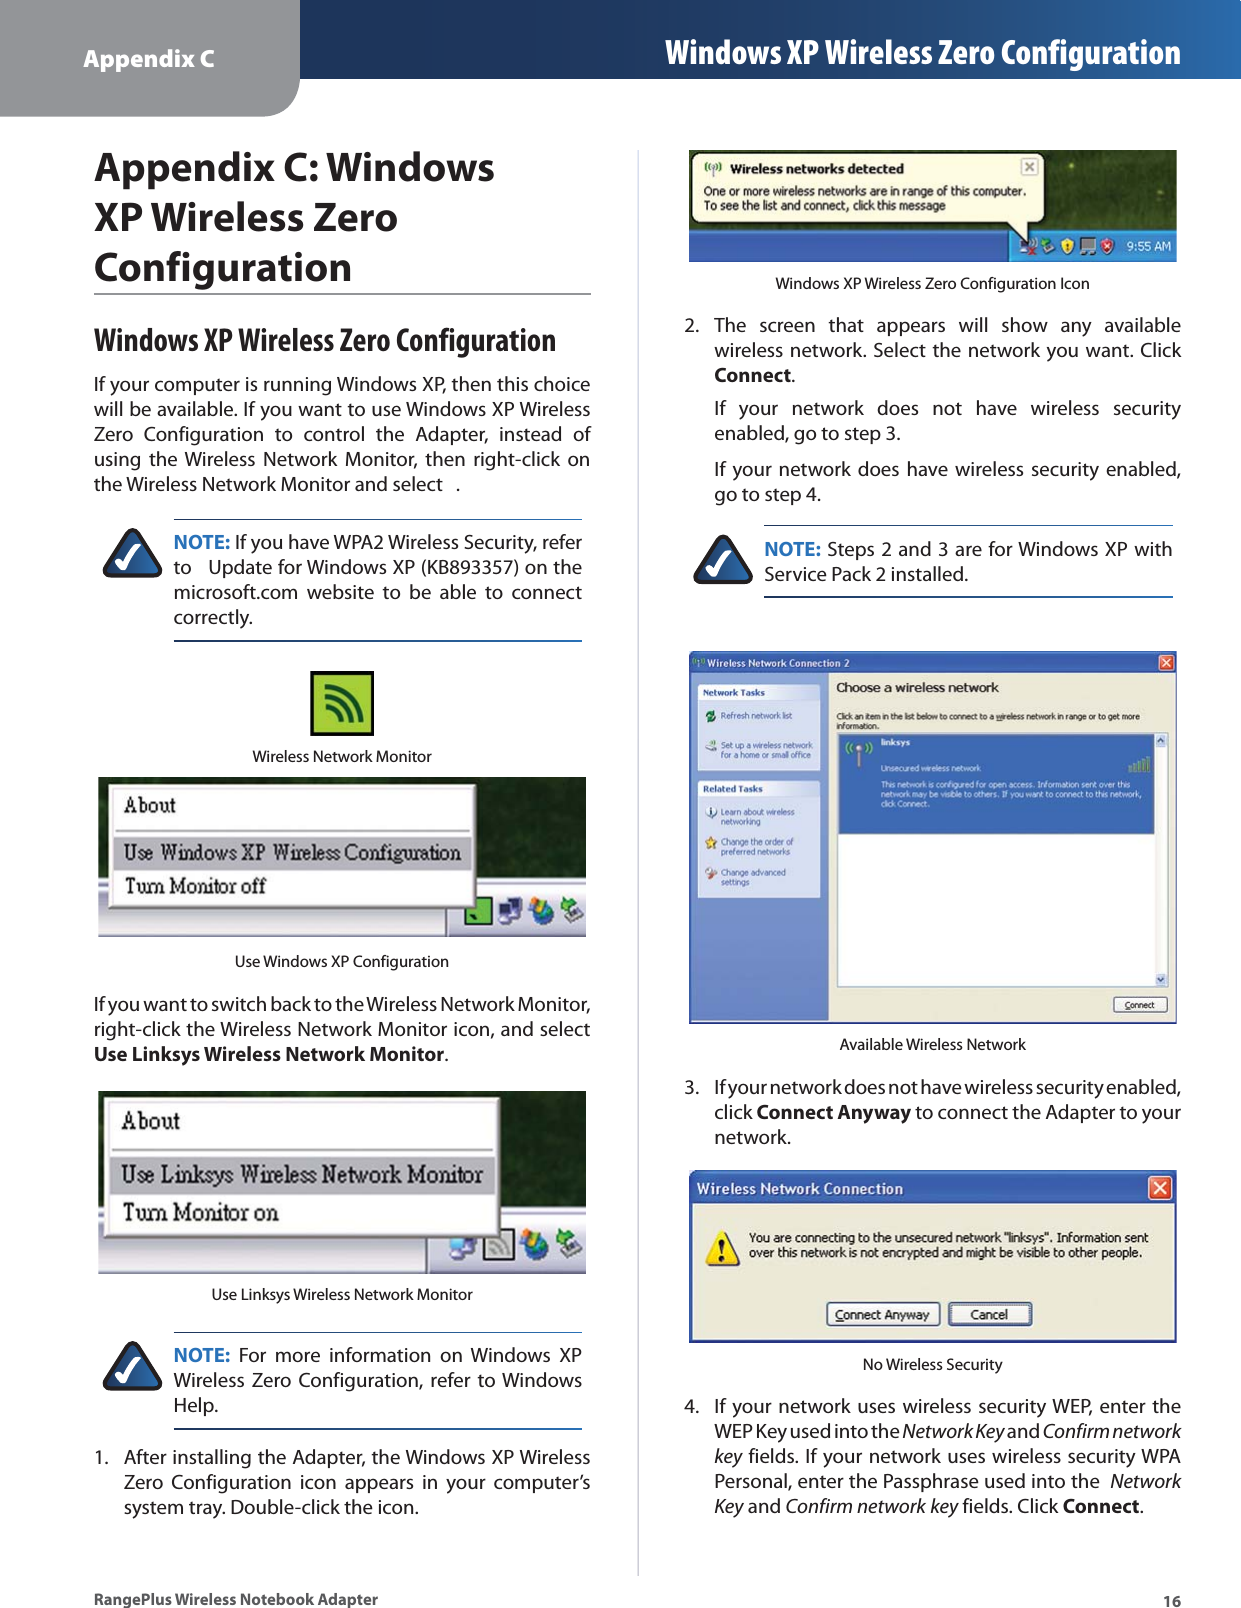 Appendix C Windows XP Wireless Zero Configuration16RangePlus Wireless Notebook AdapterAppendix C: Windows XP Wireless Zero ConfigurationWindows XP Wireless Zero ConfigurationIf your computer is running Windows XP, then this choice will be available. If you want to use Windows XP Wireless Zero Configuration to control the Adapter, instead of using the Wireless Network Monitor, then right-click on the Wireless Network Monitor and select  .NOTE: If you have WPA2 Wireless Security, refer to   Update for Windows XP (KB893357) on the microsoft.com website to be able to connect correctly.Wireless Network MonitorUse Windows XP ConfigurationIf you want to switch back to the Wireless Network Monitor, right-click the Wireless Network Monitor icon, and select Use Linksys Wireless Network Monitor.Use Linksys Wireless Network MonitorNOTE: For more information on Windows XP Wireless Zero Configuration, refer to Windows Help.After installing the Adapter, the Windows XP Wireless Zero Configuration icon appears in your computer’s system tray. Double-click the icon. 1.Windows XP Wireless Zero Configuration IconThe screen that appears will show any available wireless network. Select the network you want. Click Connect.If your network does not have wireless security enabled, go to step 3.If your network does have wireless security enabled, go to step 4.NOTE: Steps 2 and 3 are for Windows XP with Service Pack 2 installed.Available Wireless NetworkIf your network does not have wireless security enabled, click Connect Anyway to connect the Adapter to your network.No Wireless SecurityIf your network uses wireless security WEP, enter the WEP Key used into the Network Key and Confirm networkkey fields. If your network uses wireless security WPA Personal, enter the Passphrase used into the  Network Key and Confirm network key fields. Click Connect.2.3.4.